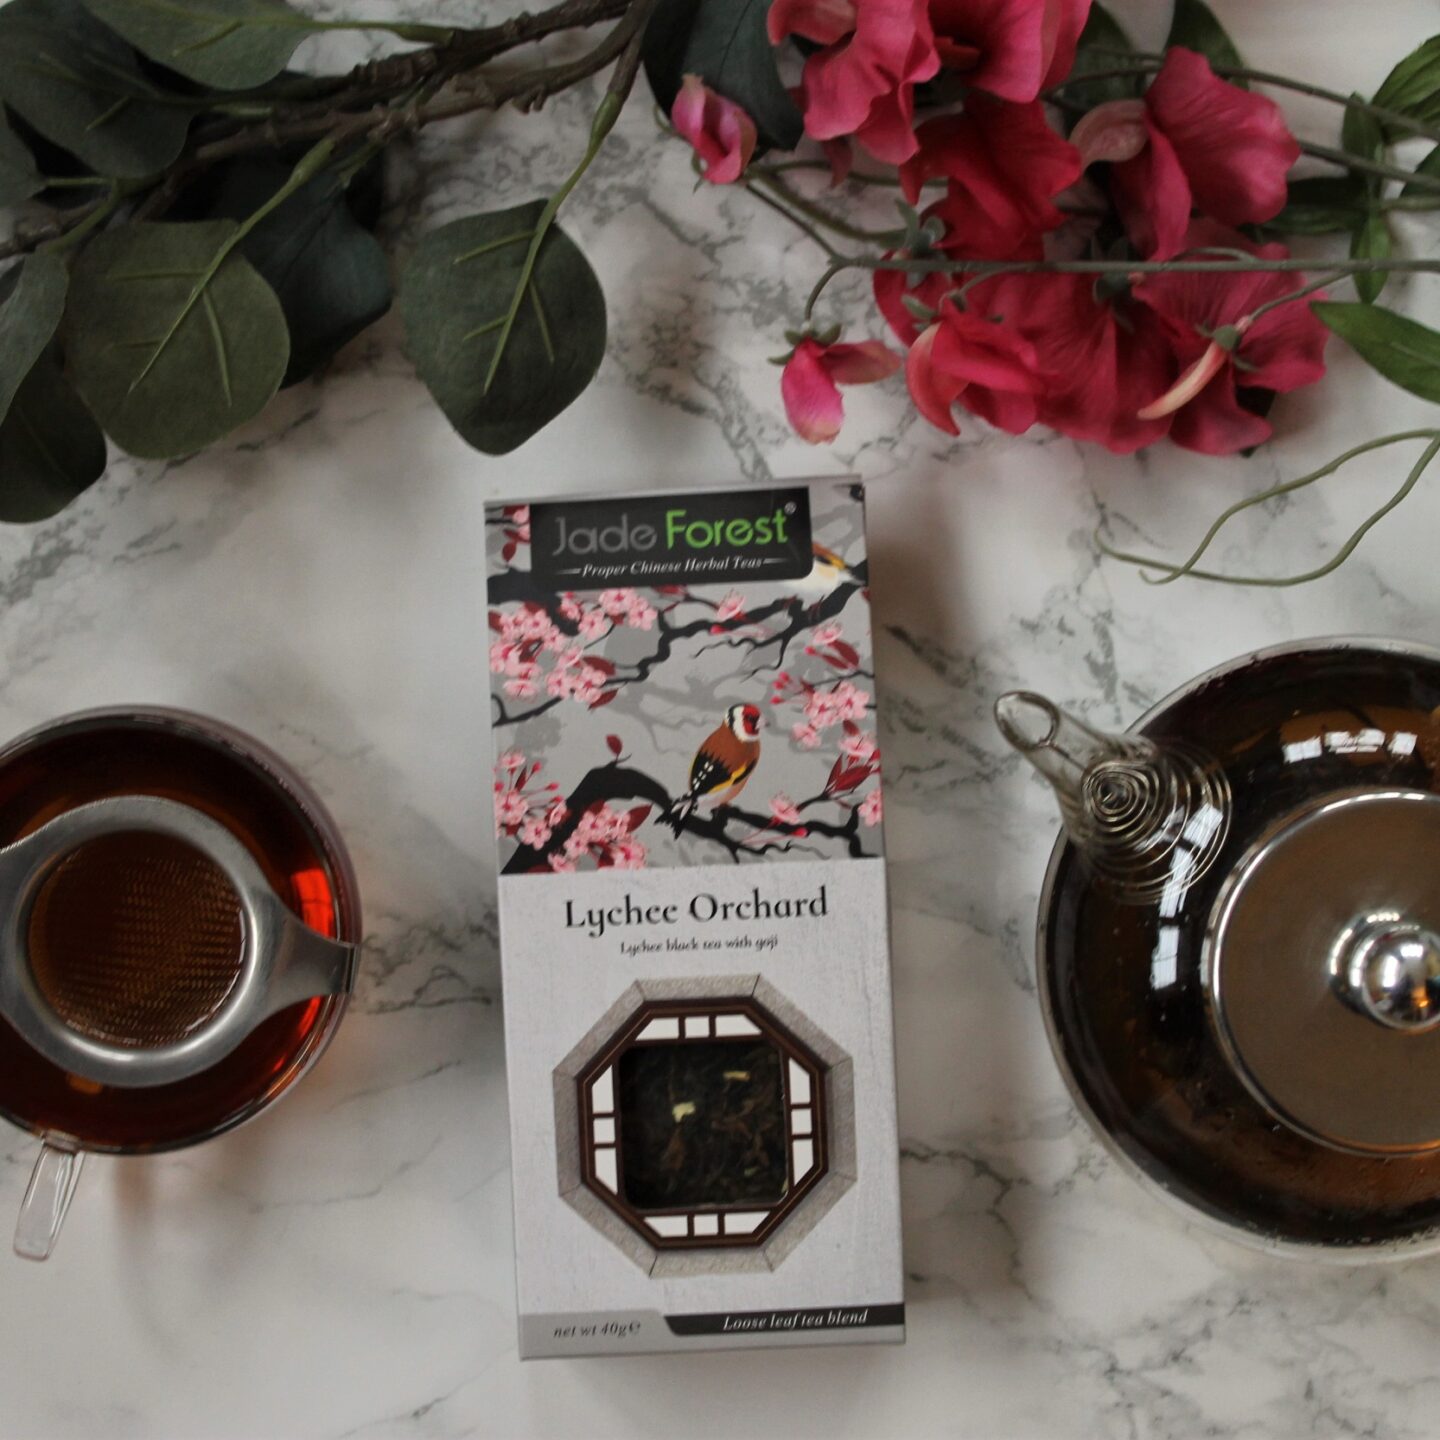 Jade Forest Lychee Orchard Tea Review